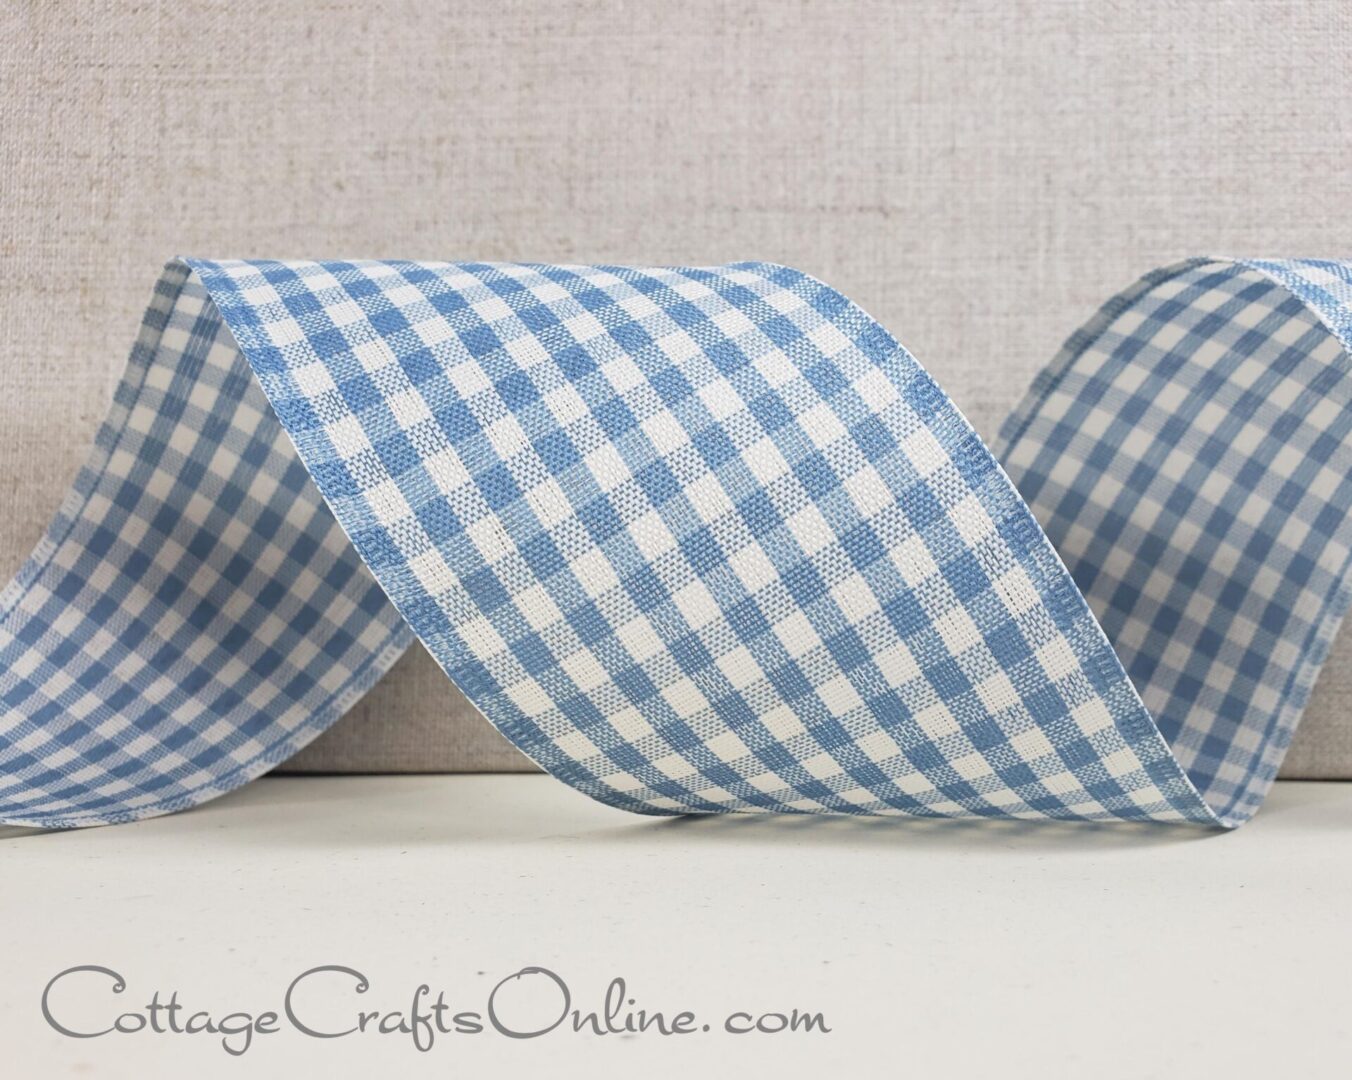 Farmhouse pale blue and ivory gingham check 2.5" wide wired ribbon from the Etsy shop of Cottage Crafts Online.